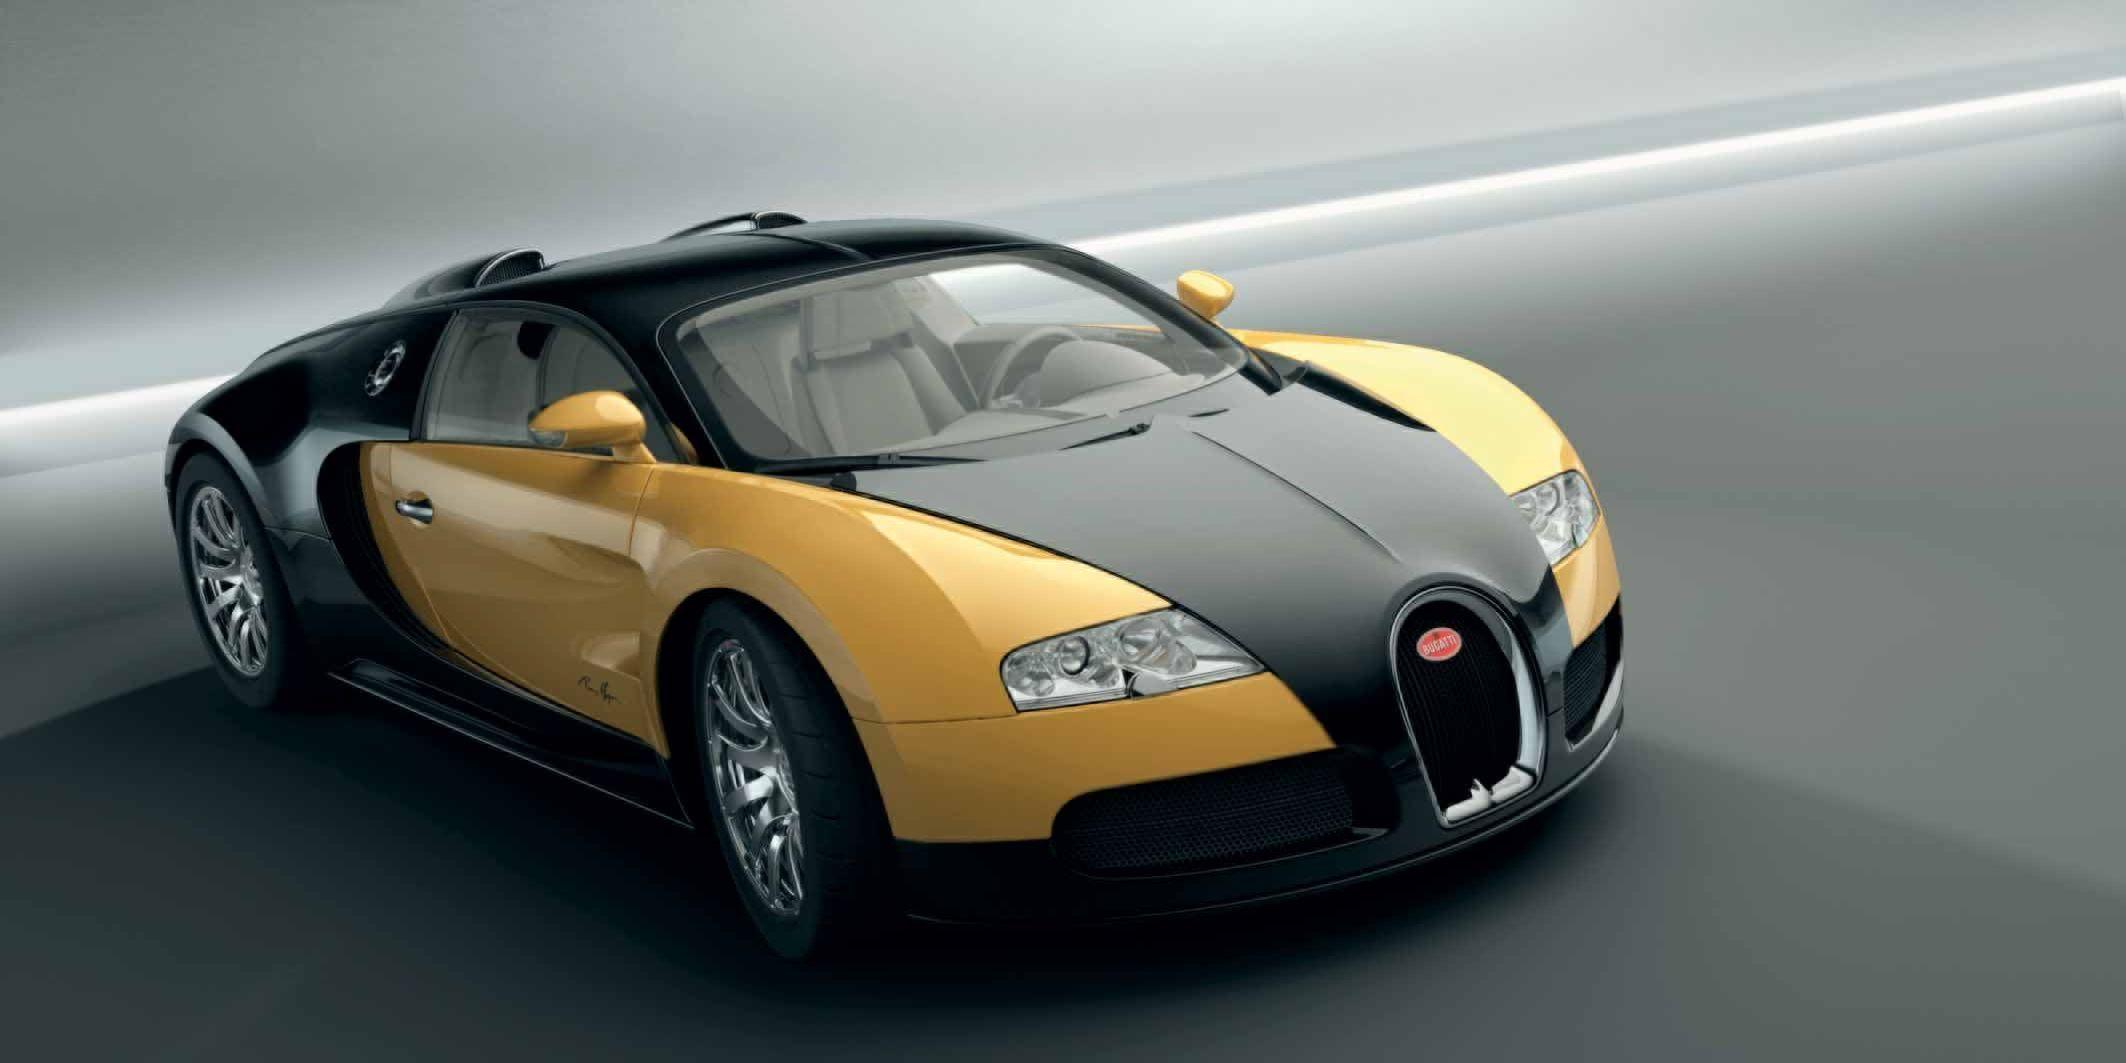 Wallpaper For > Red And Black Bugatti Veyron Wallpaper